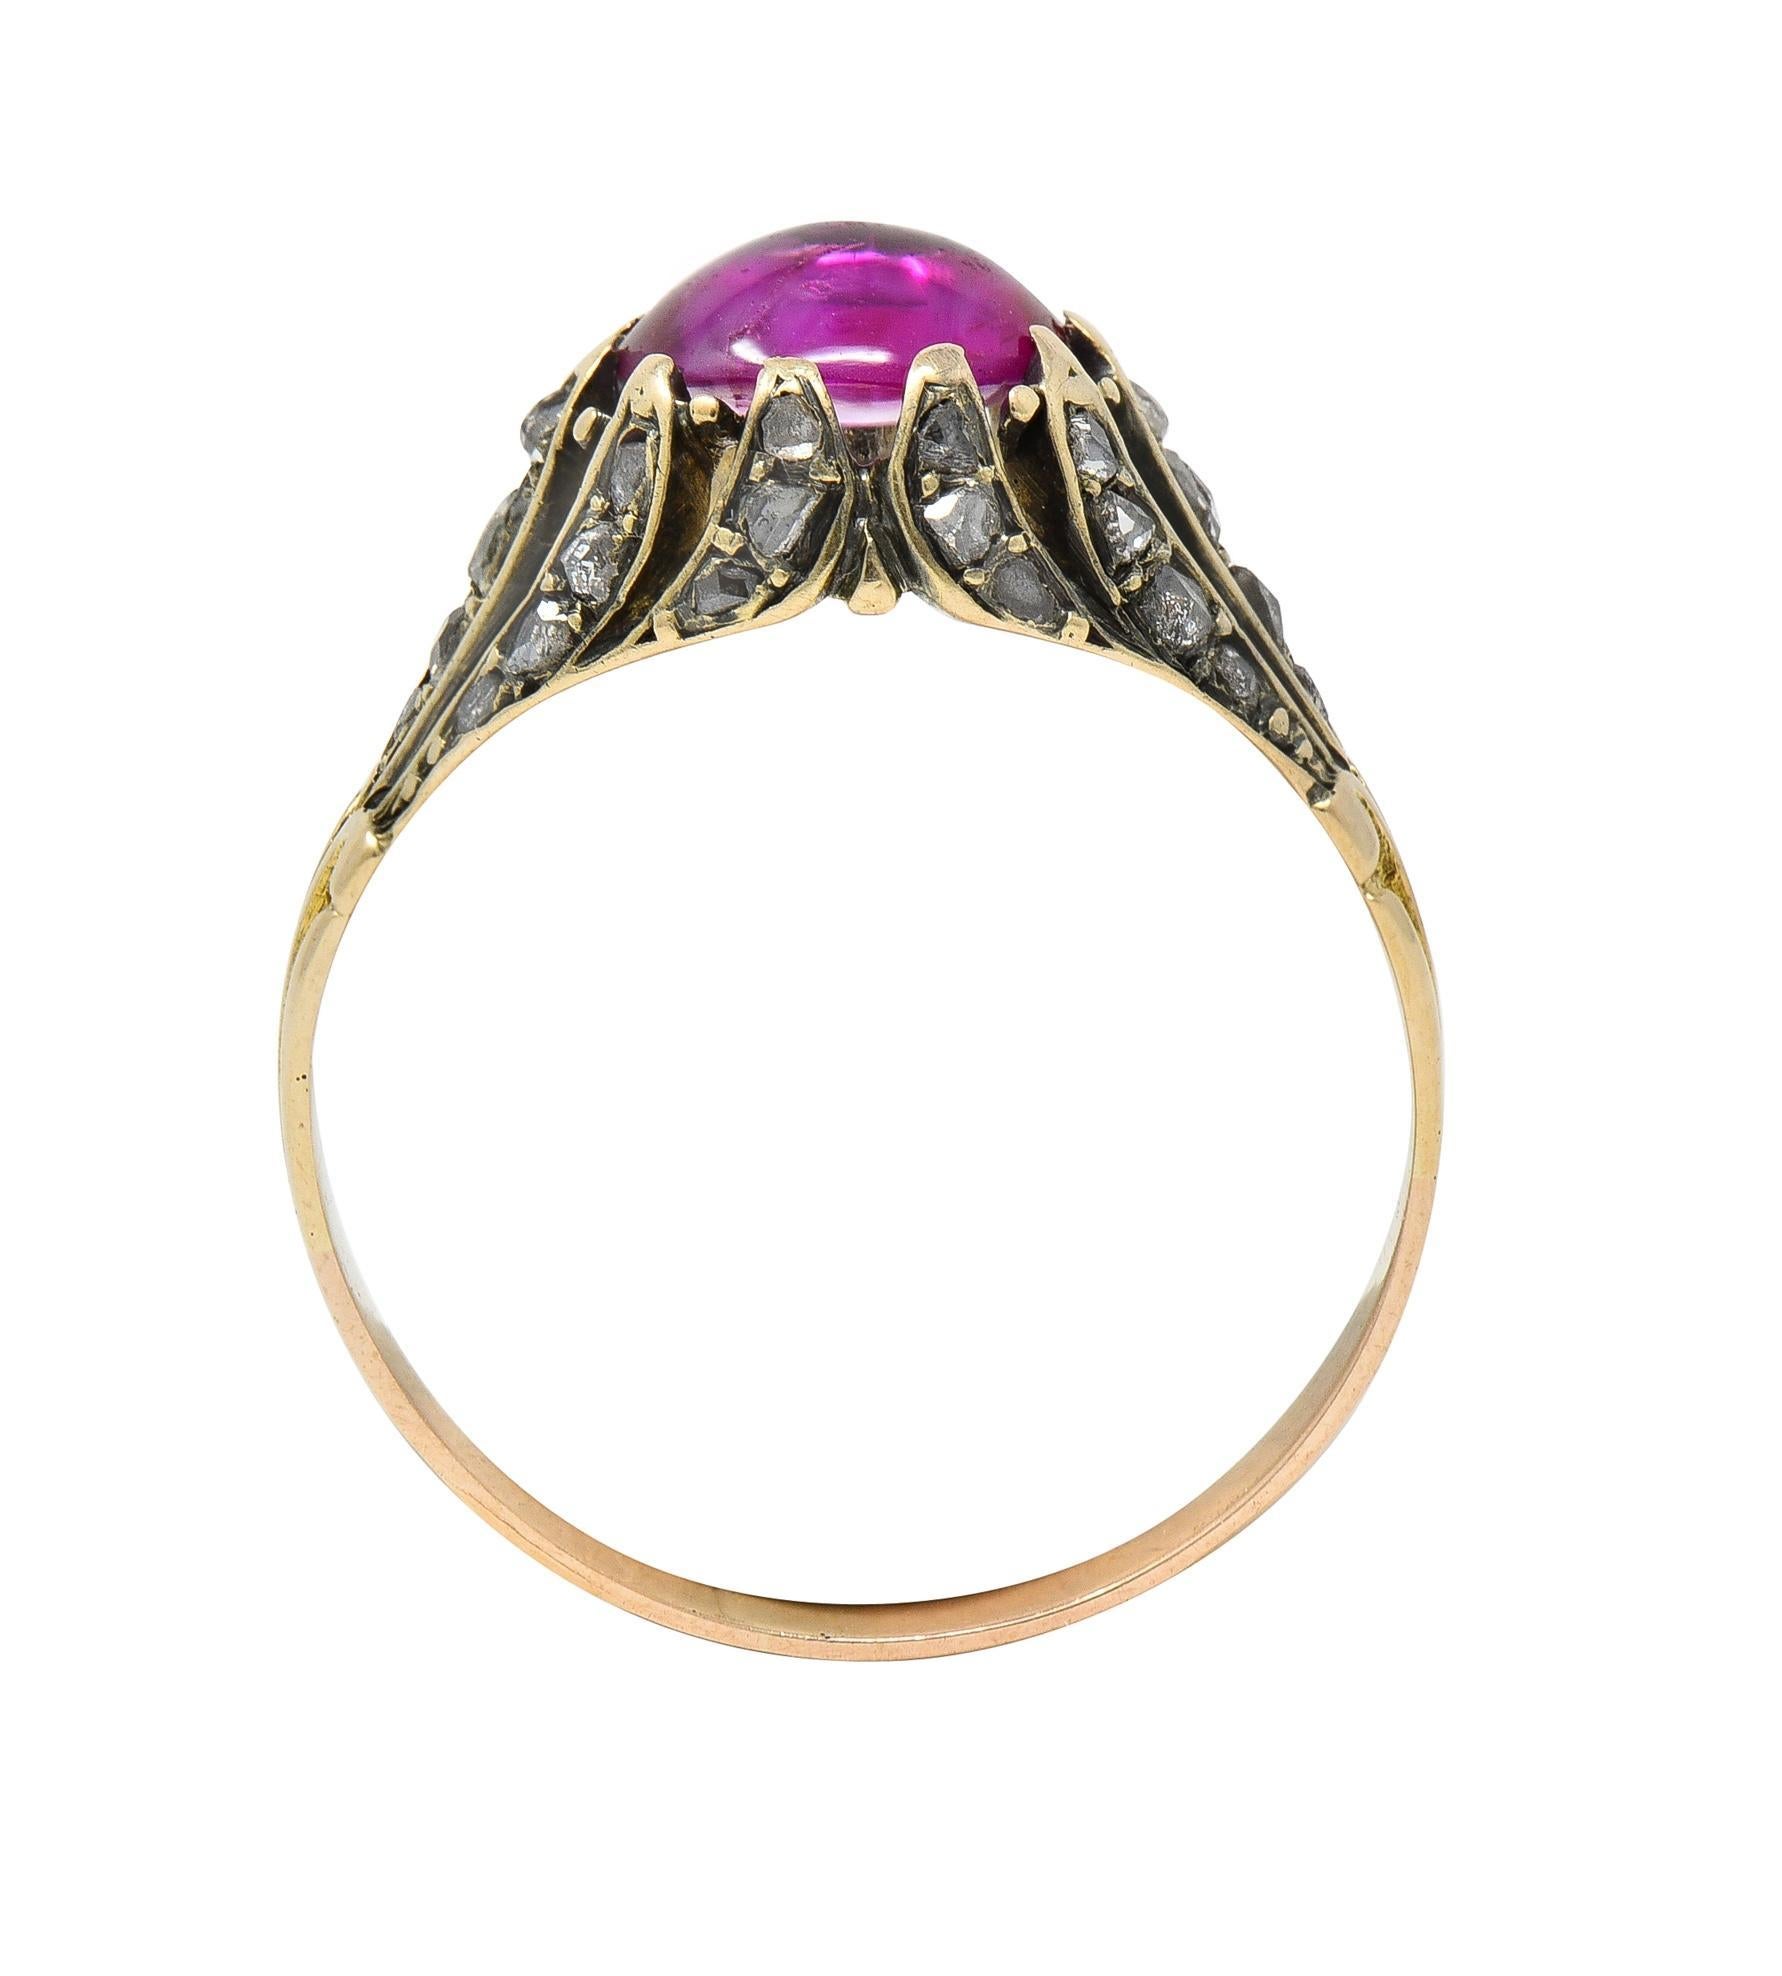 Victorian Cabochon Ruby Diamond 14 Karat Yellow Gold Foliate Antique Ring For Sale 4